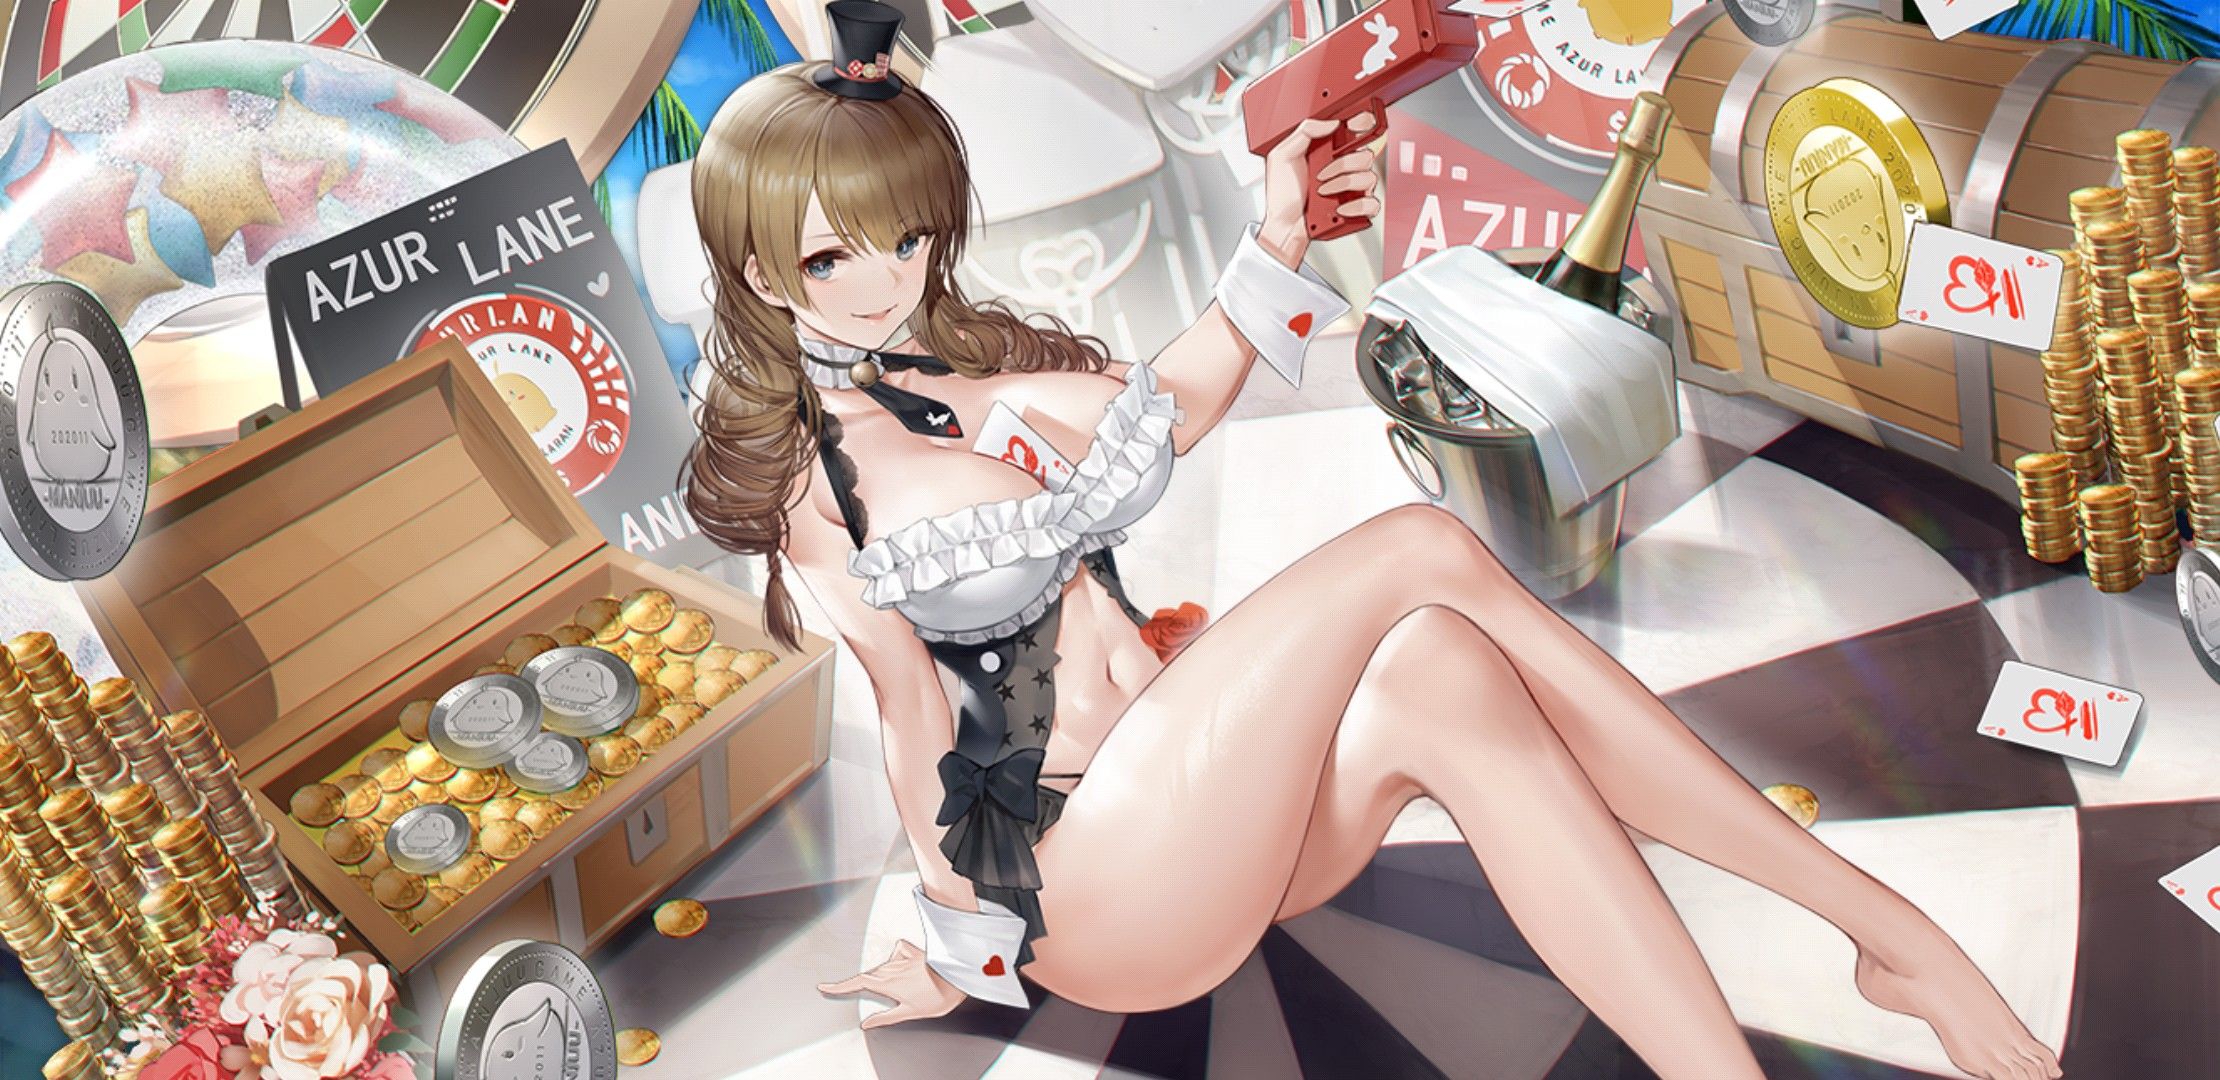 【There is an image】 Smartphone that urges charging with erotic swimsuits is malicious 15